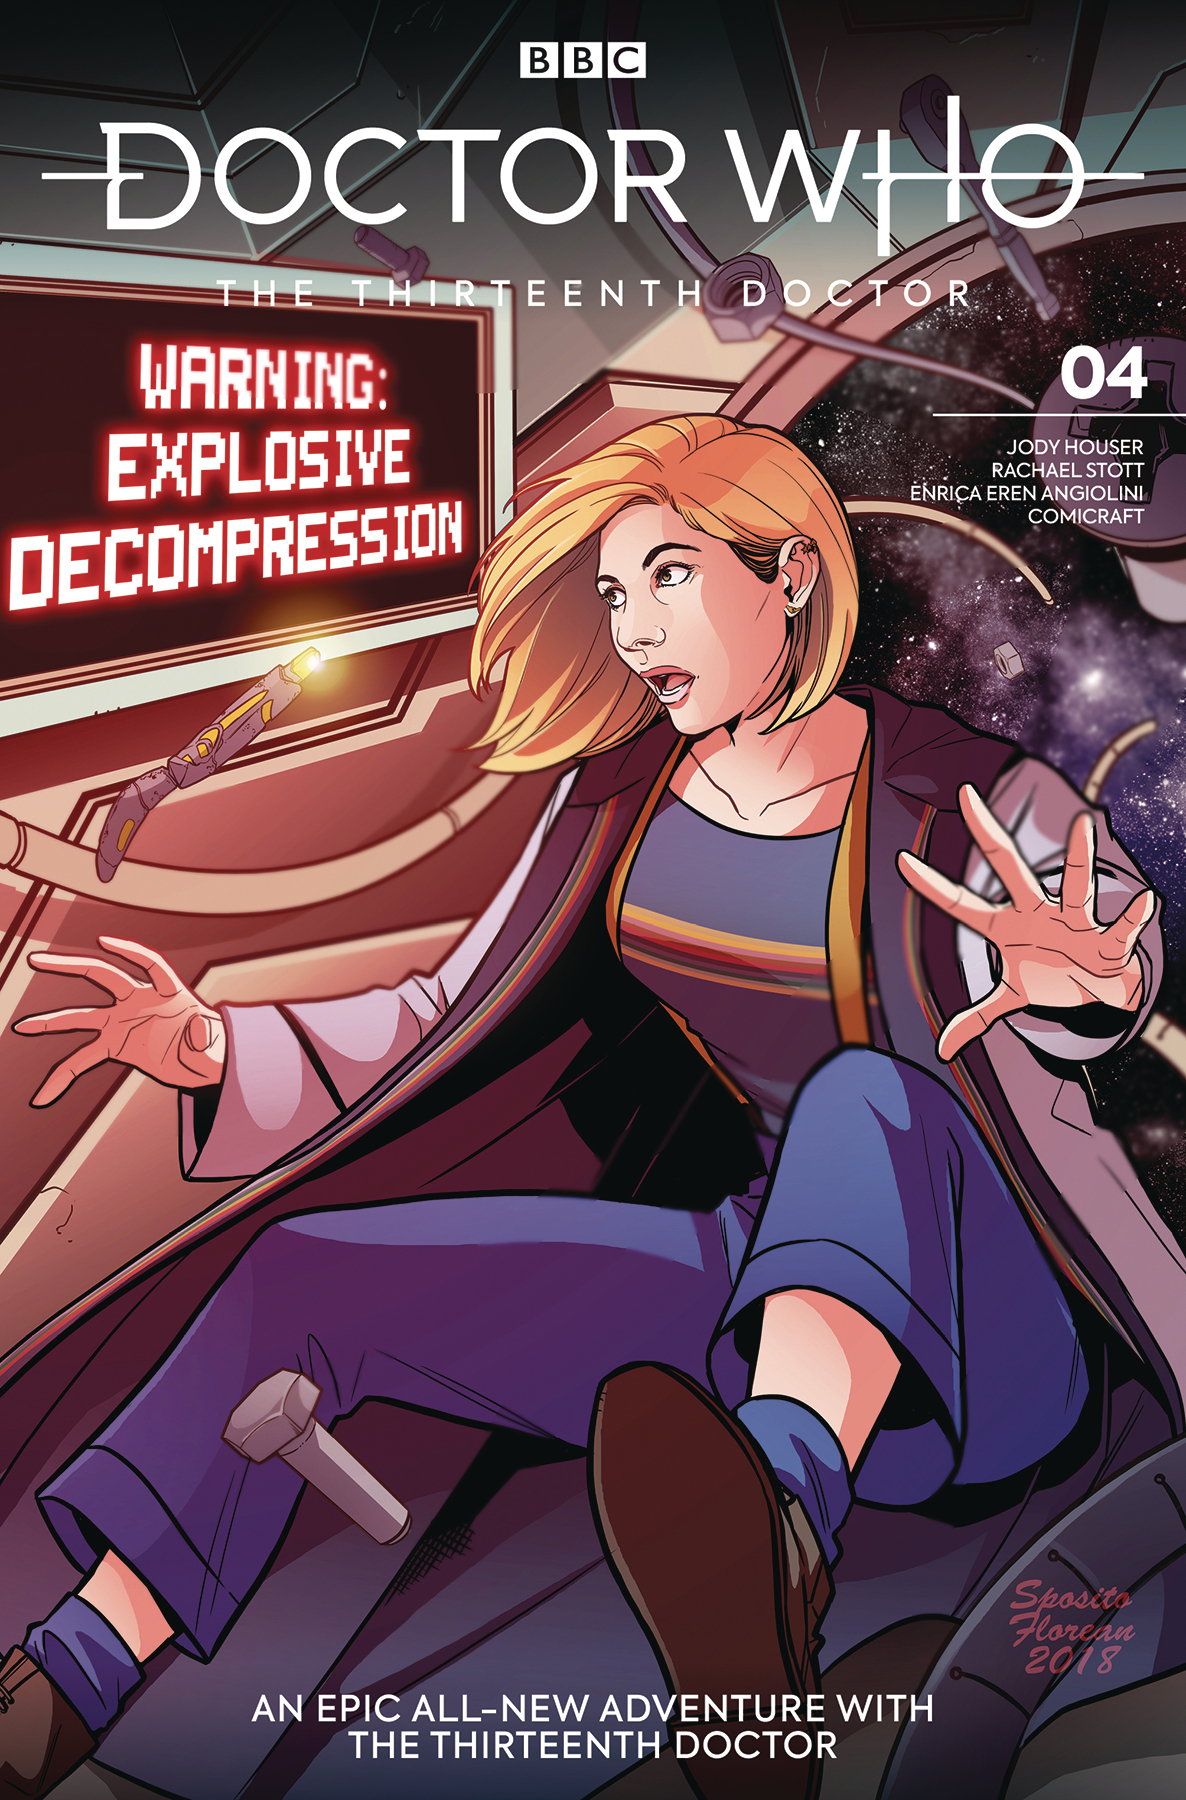 Doctor Who: The Thirteenth Doctor no. 4 (2018 Series)